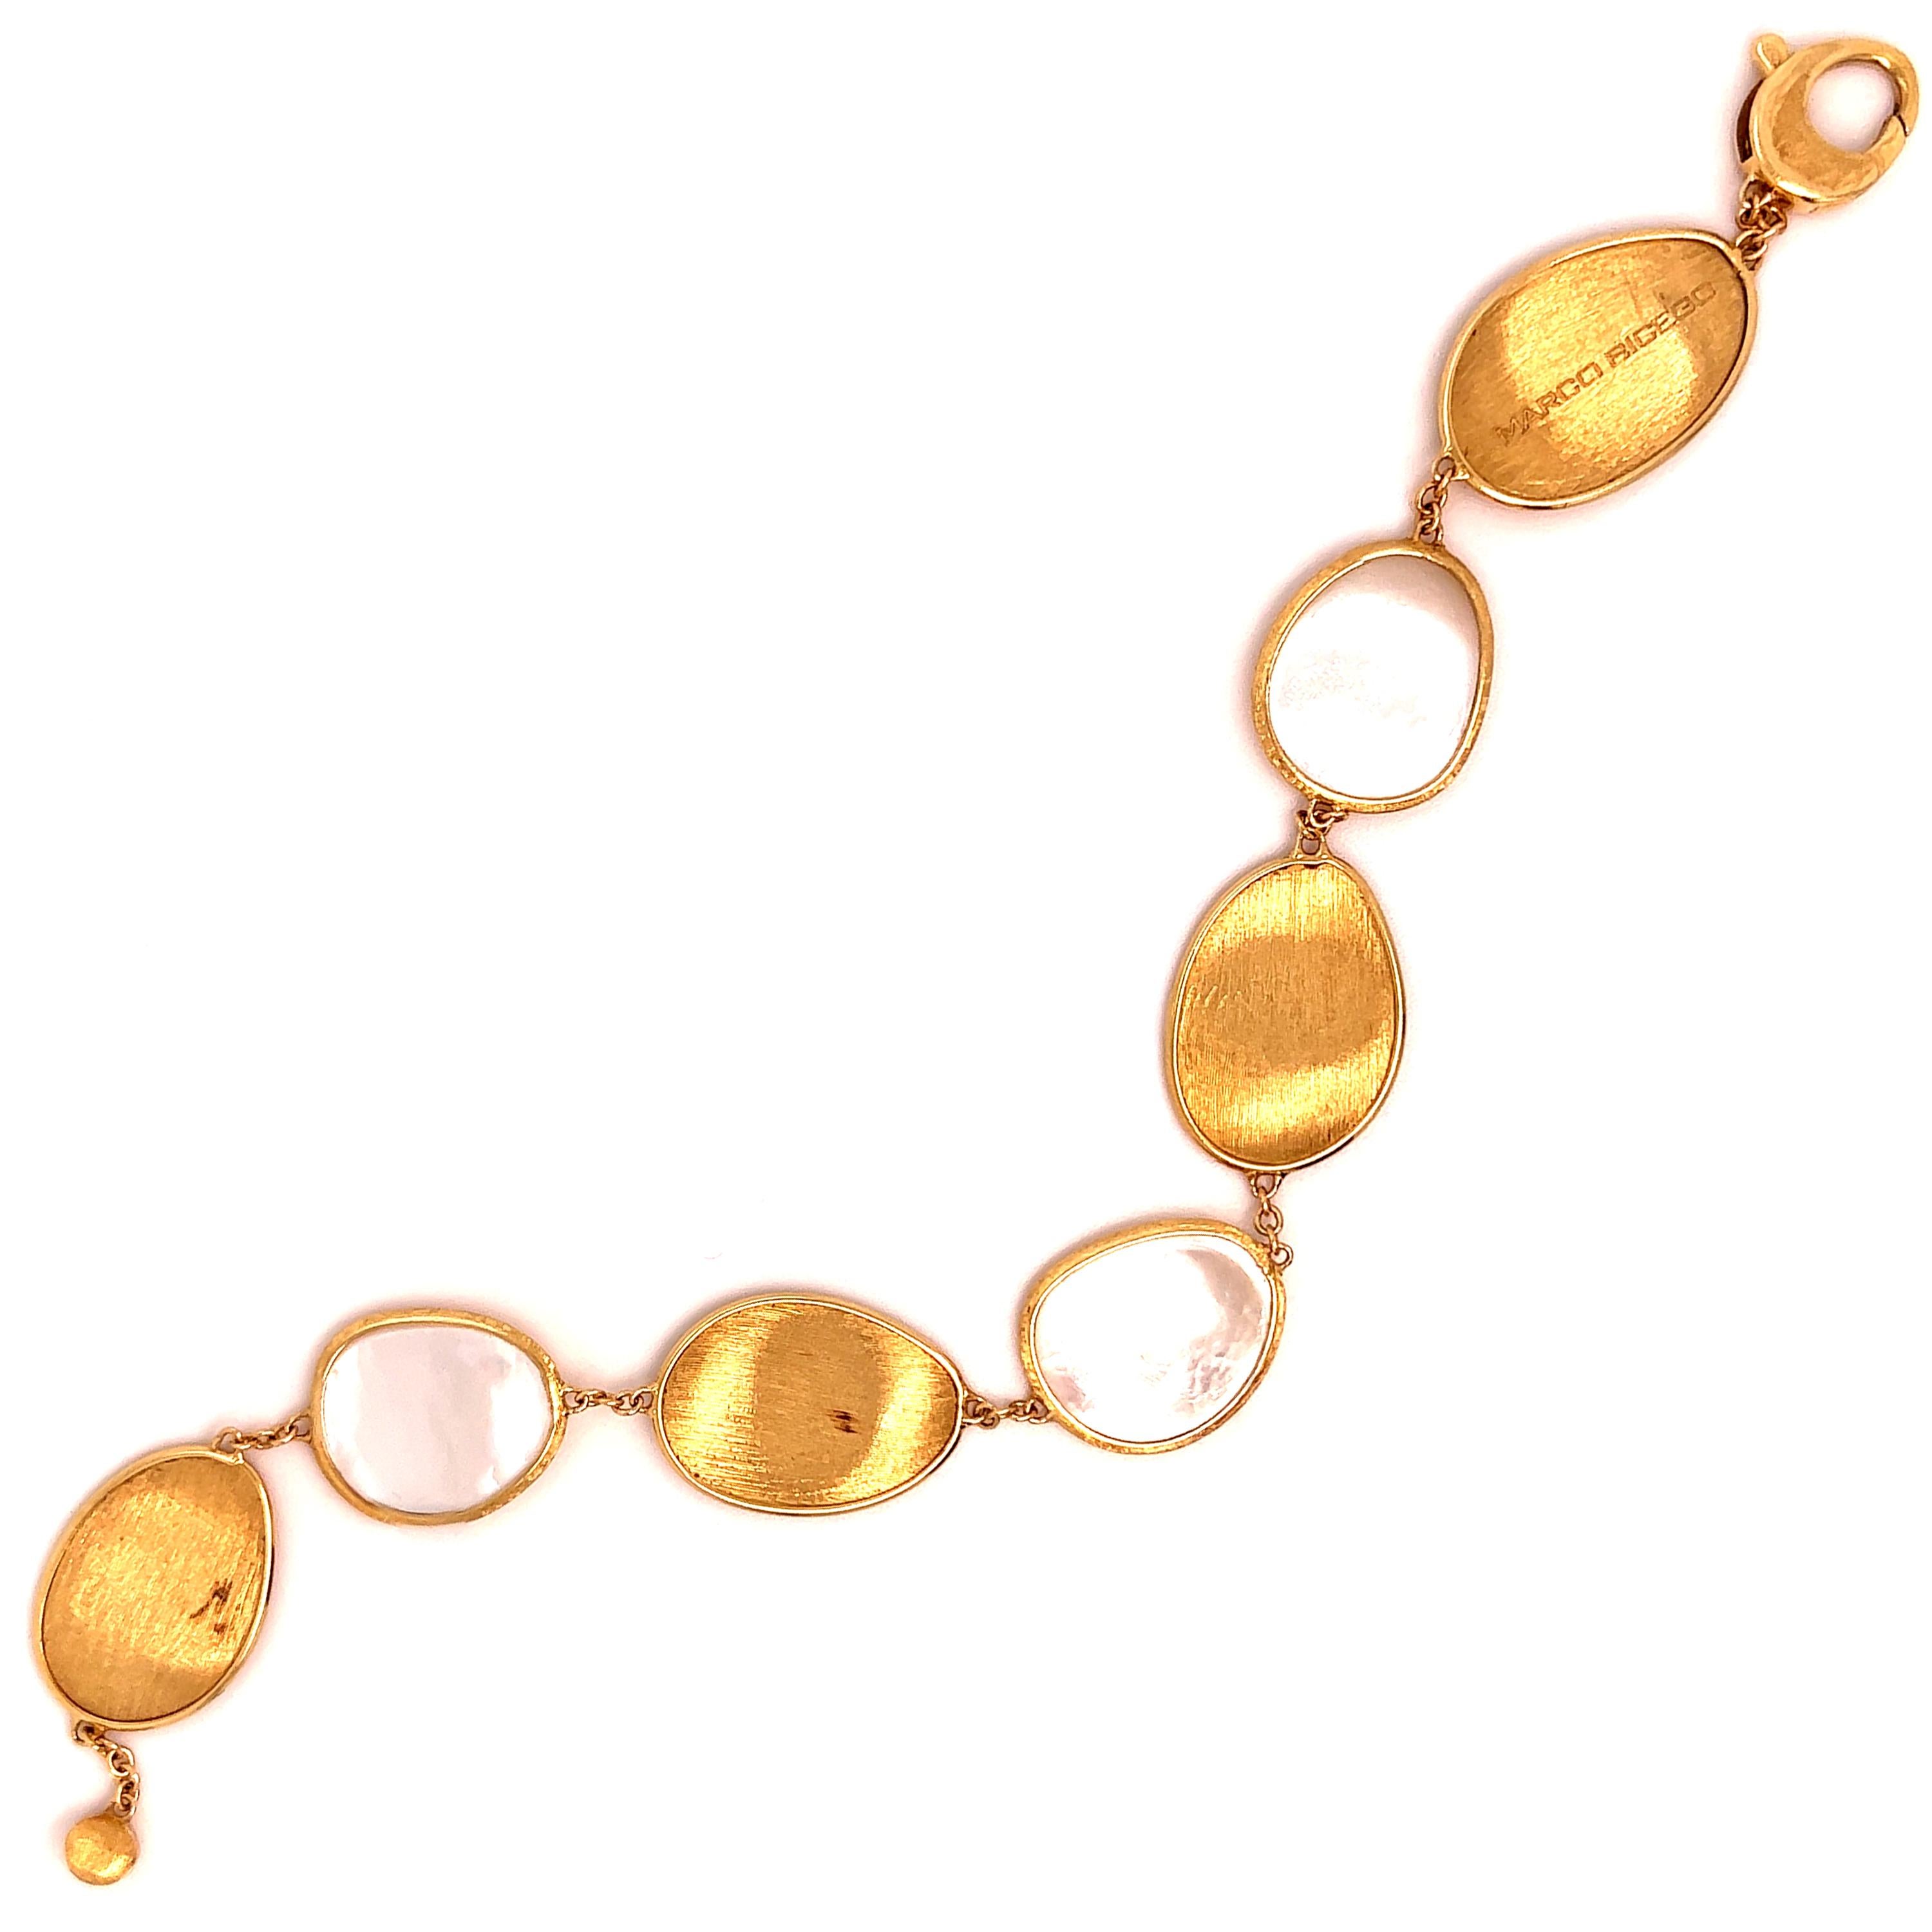 Marco Bicego Lunaria Collection 18K Yellow Gold White Mother of Pearl Bracelet

